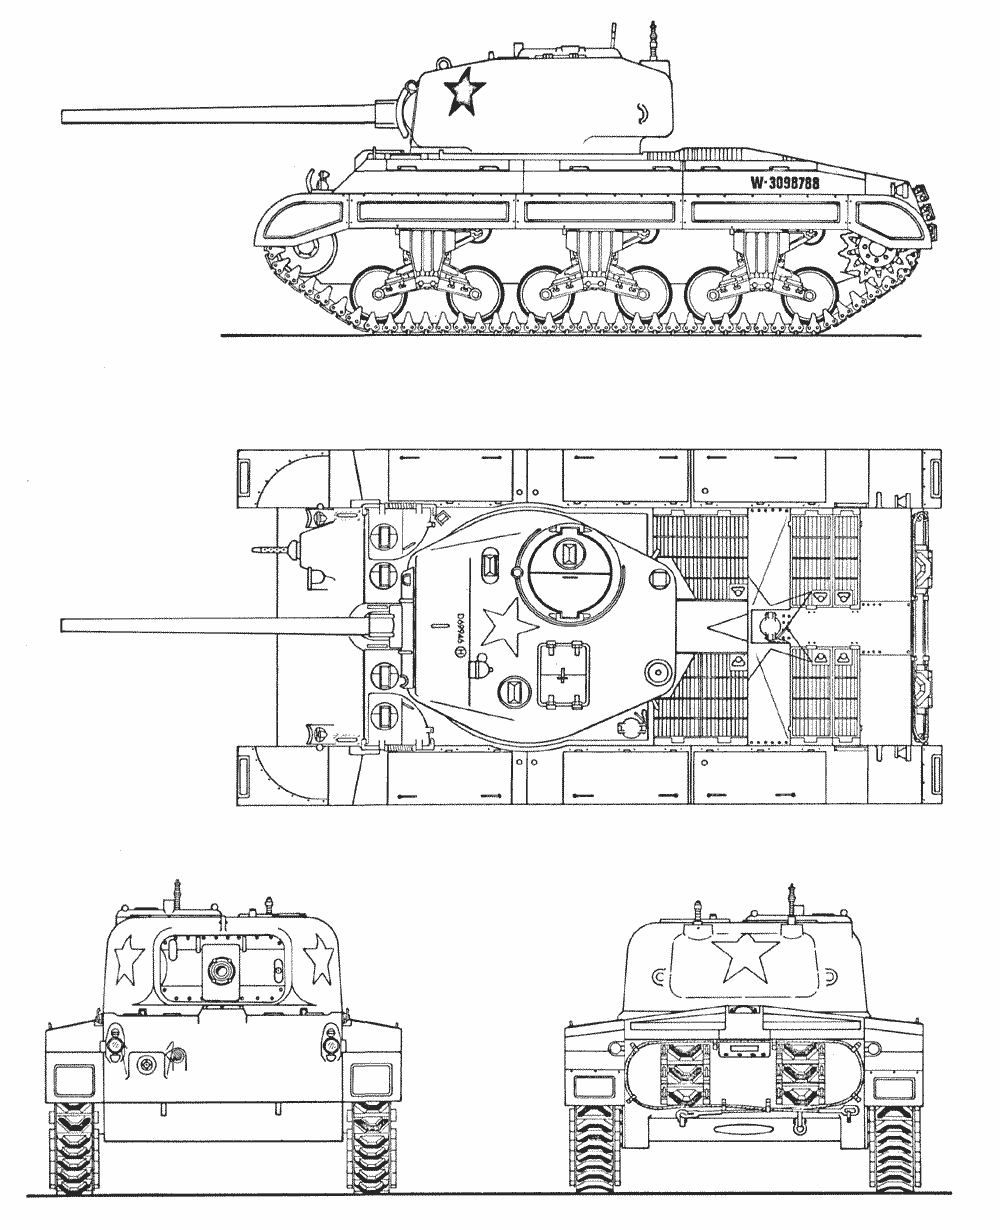 T23 prototype blueprint - Source: Pershing: a history of the medium tank T20 series